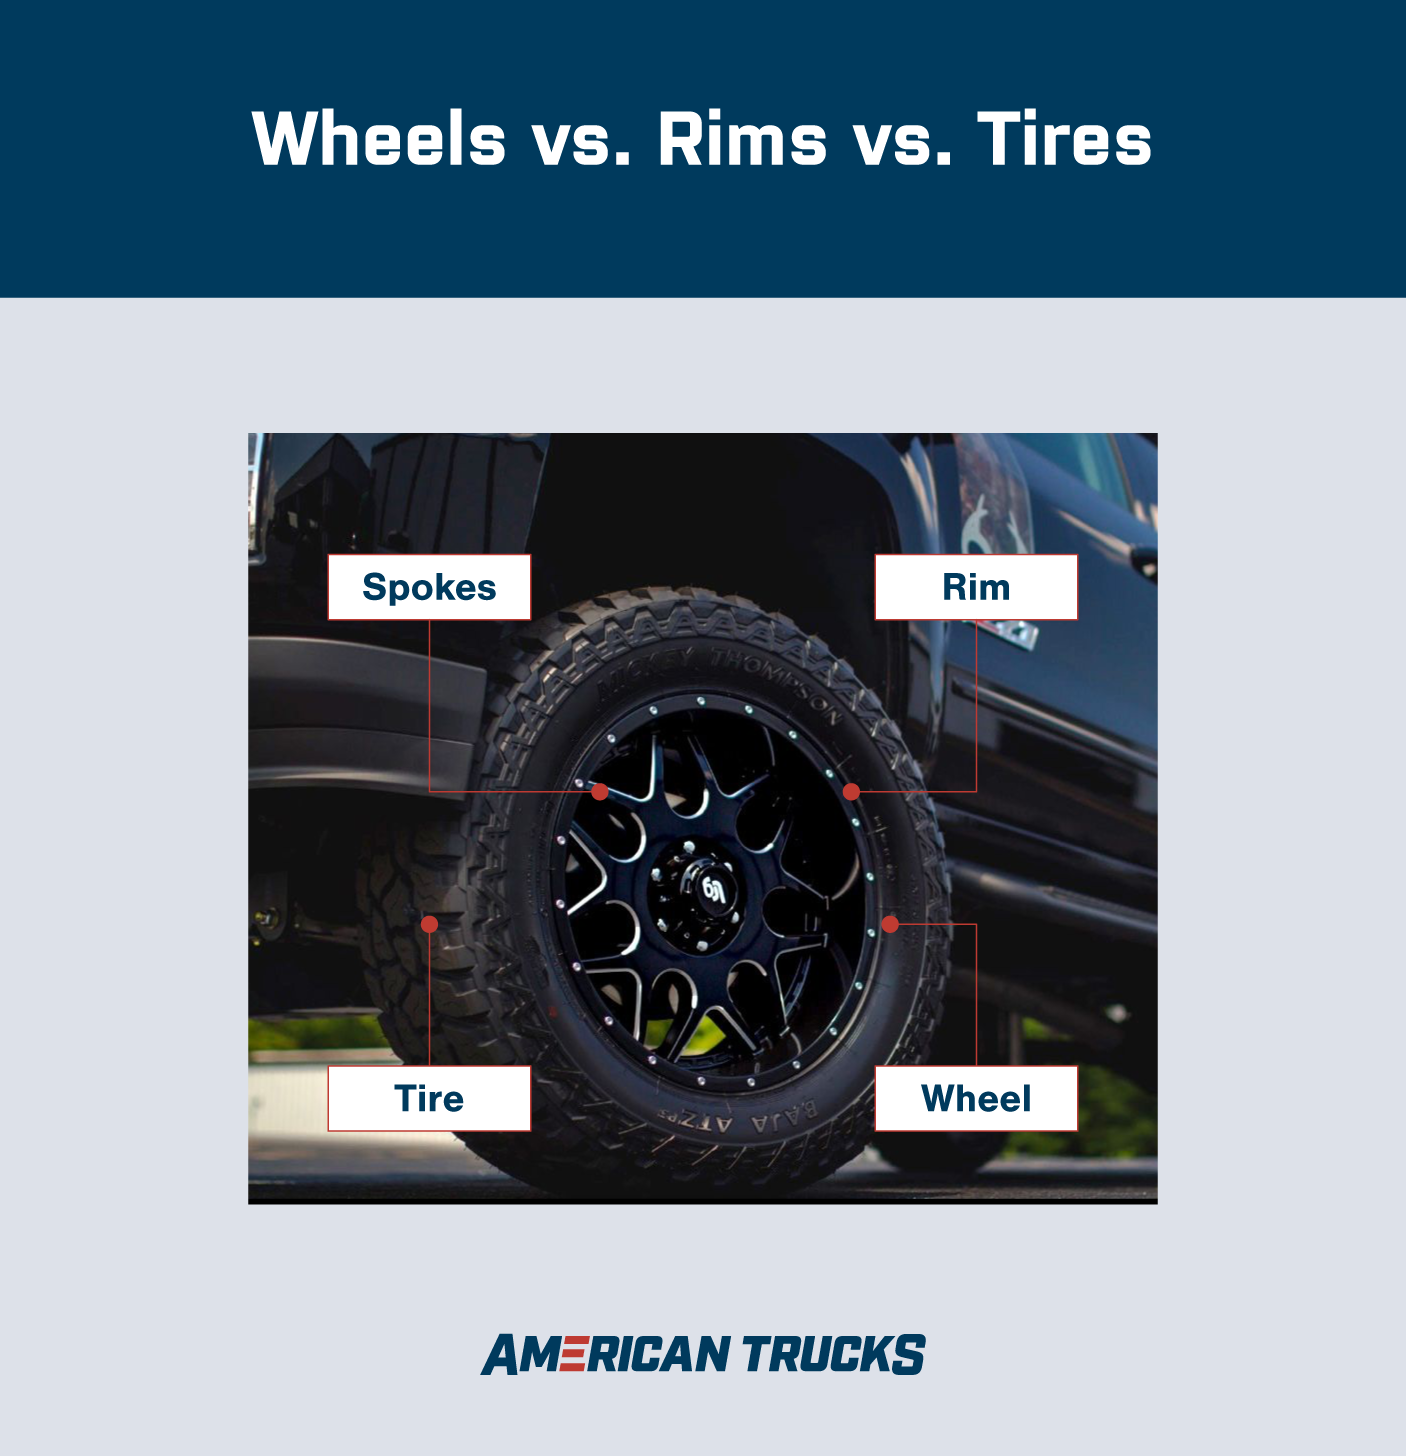 Diagram of a truck pointing to the spoke, rim, tire and wheel to differentiate these components